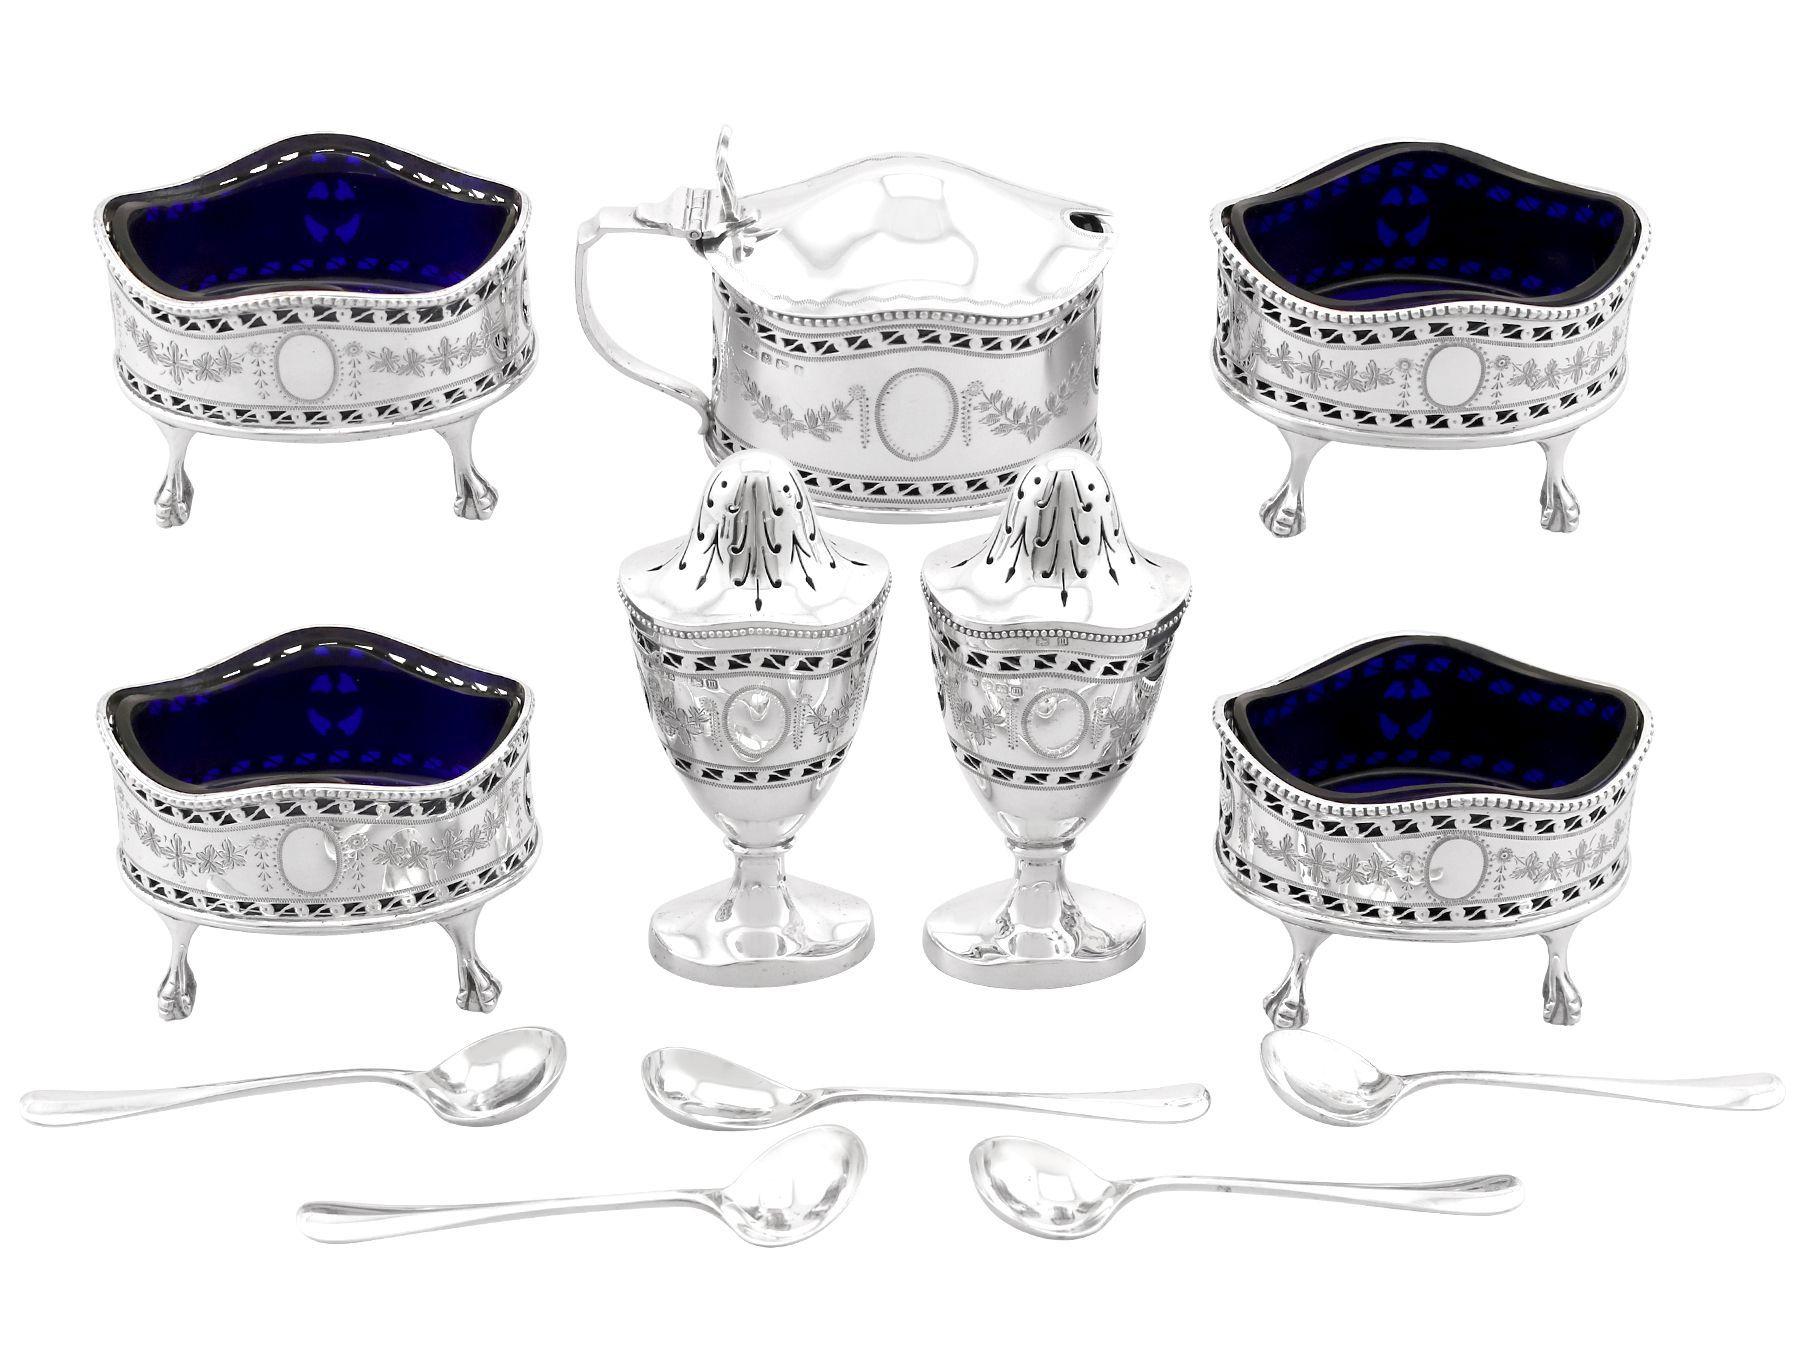 An exceptional, fine and impressive, large antique George V English sterling silver seven piece condiment / cruet set - boxed; an addition to our dining silverware collection

This exceptional antique George V seven piece boxed silver condiment